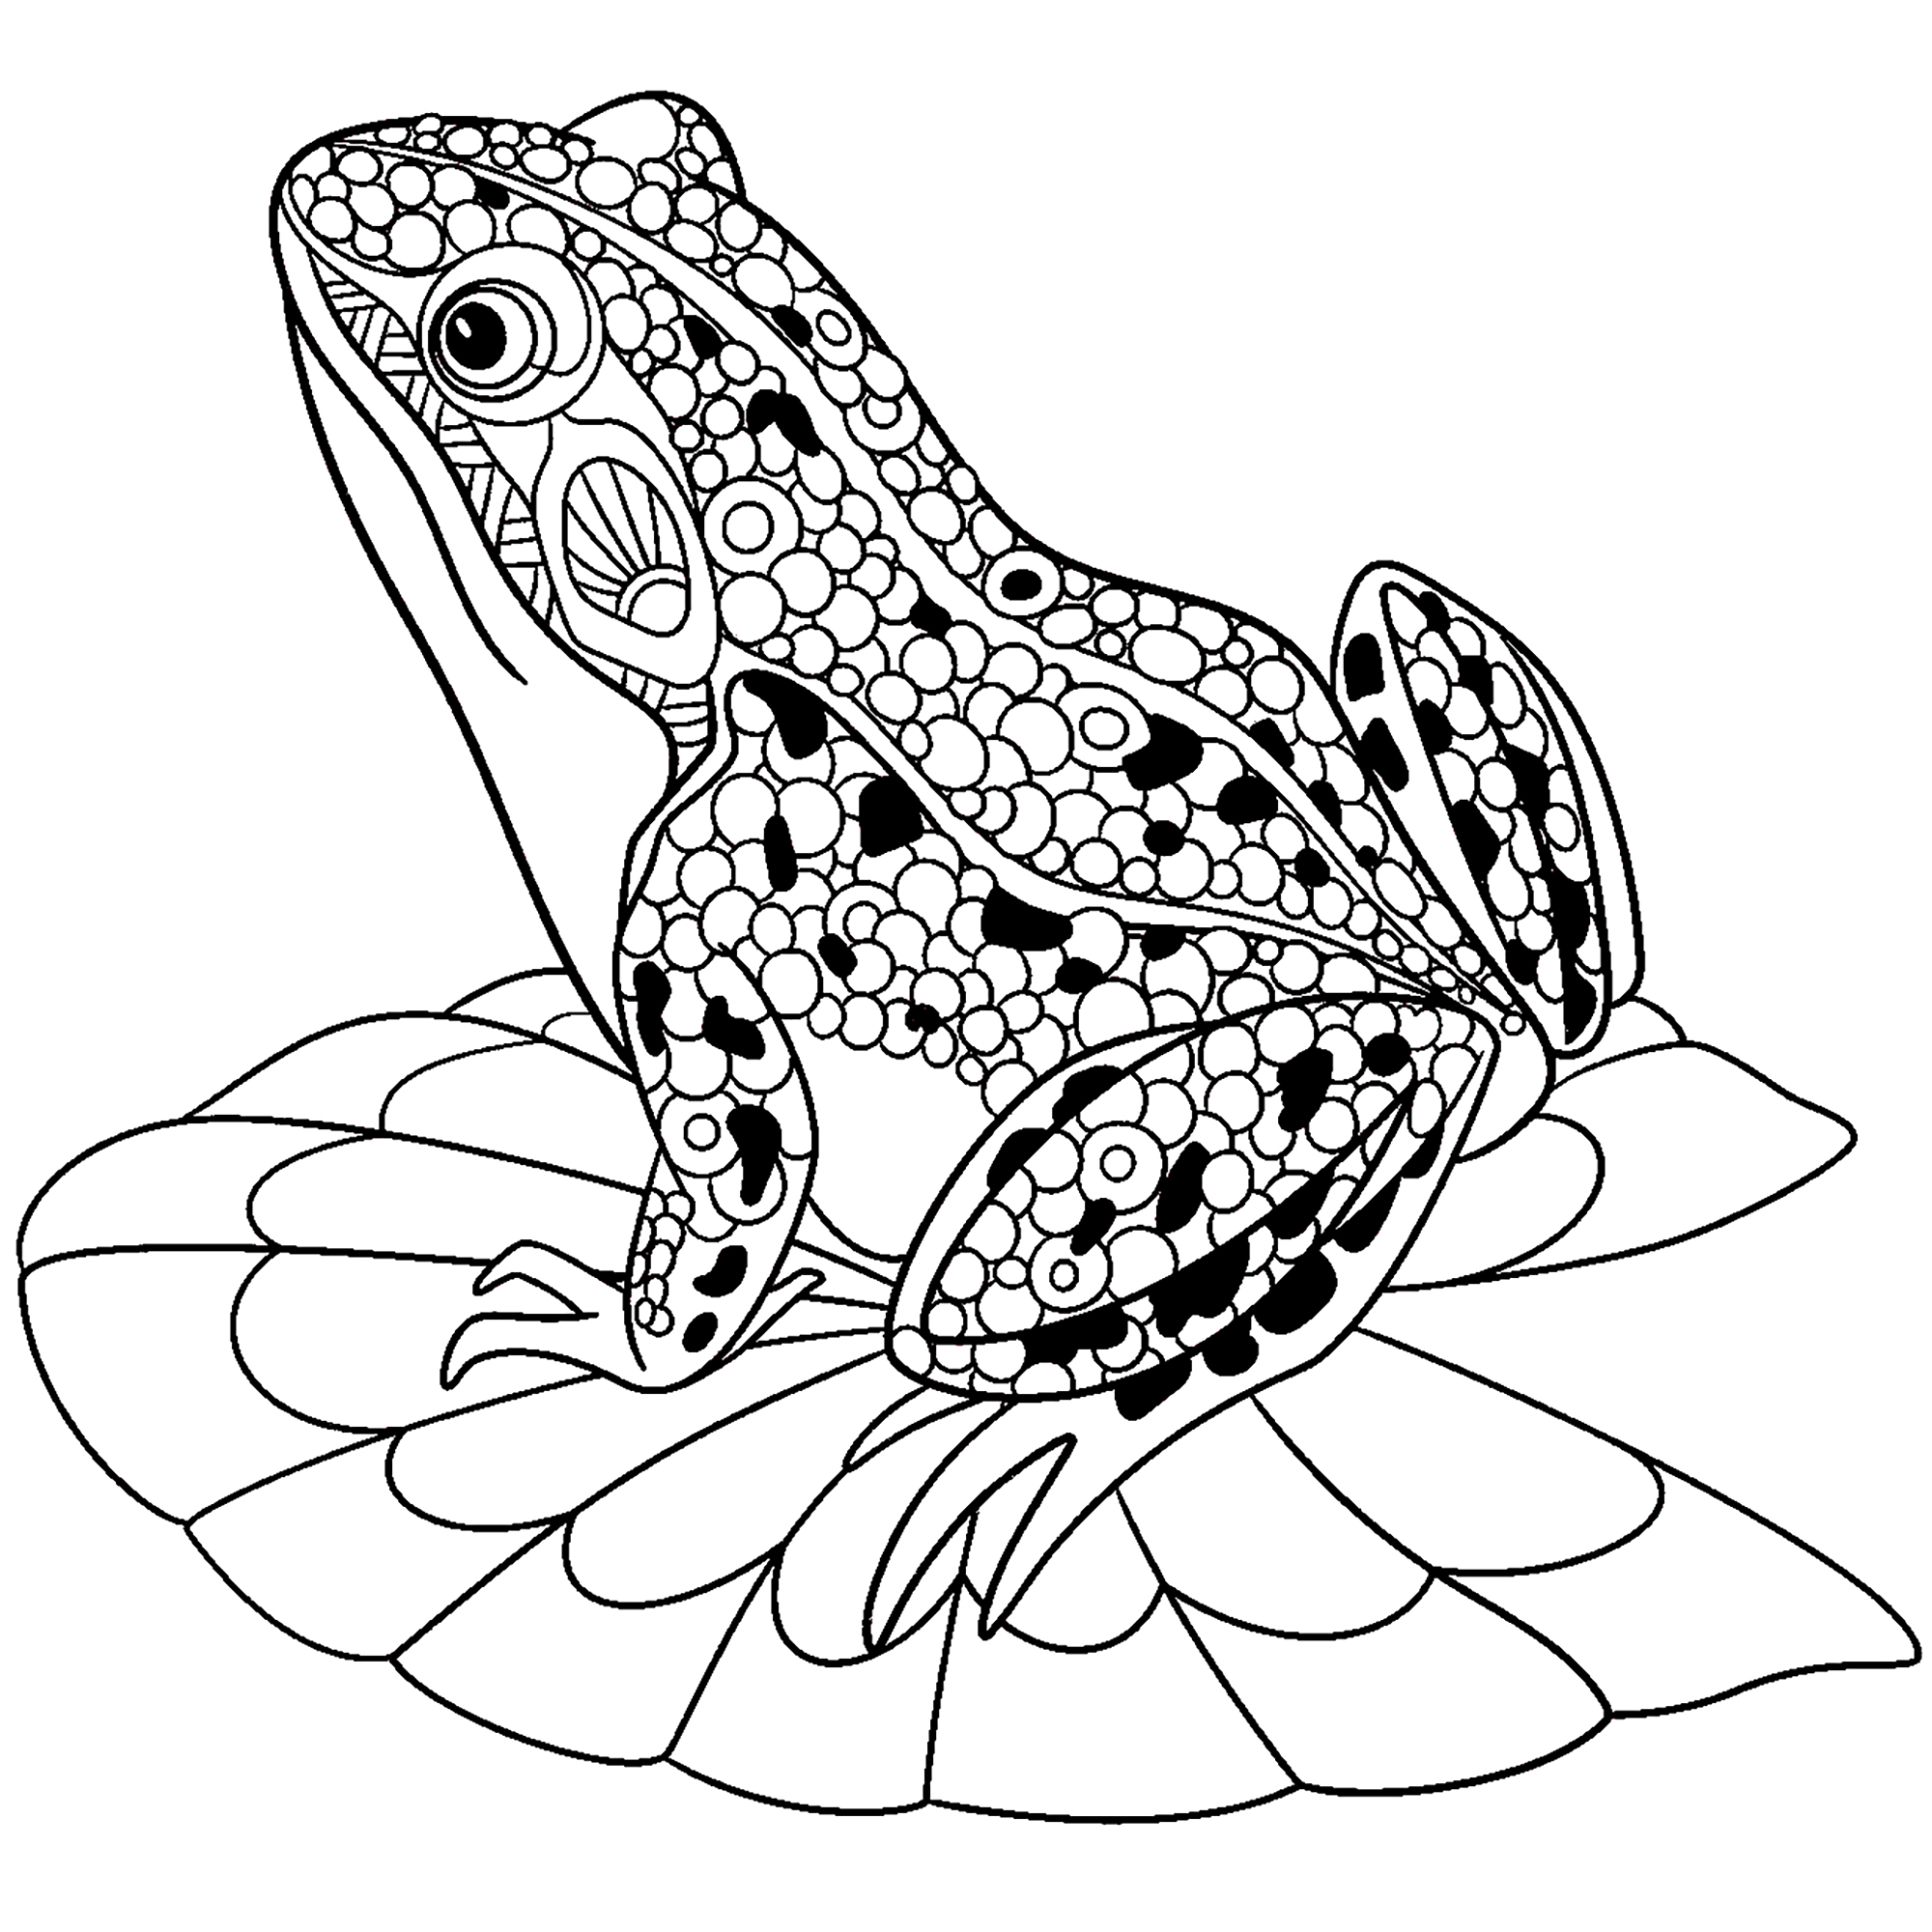 Cute frog on water lily leaf Frogs Adult Coloring Pages